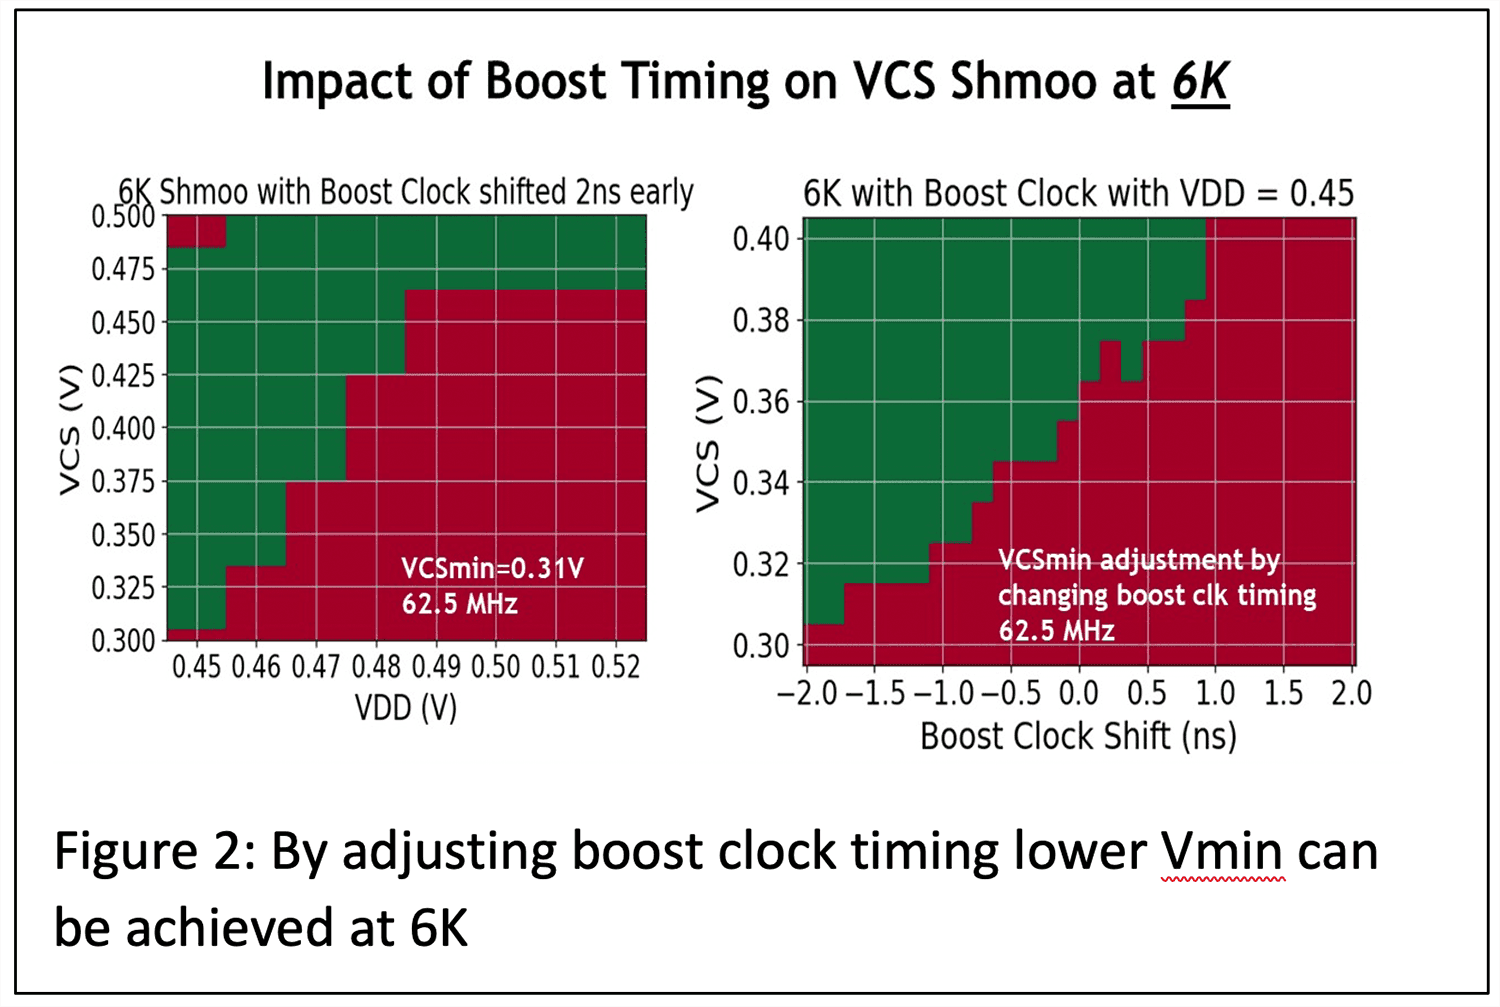 Fig 2. By adjusting boost clock timing lower Vmin can be achieved at 6K.